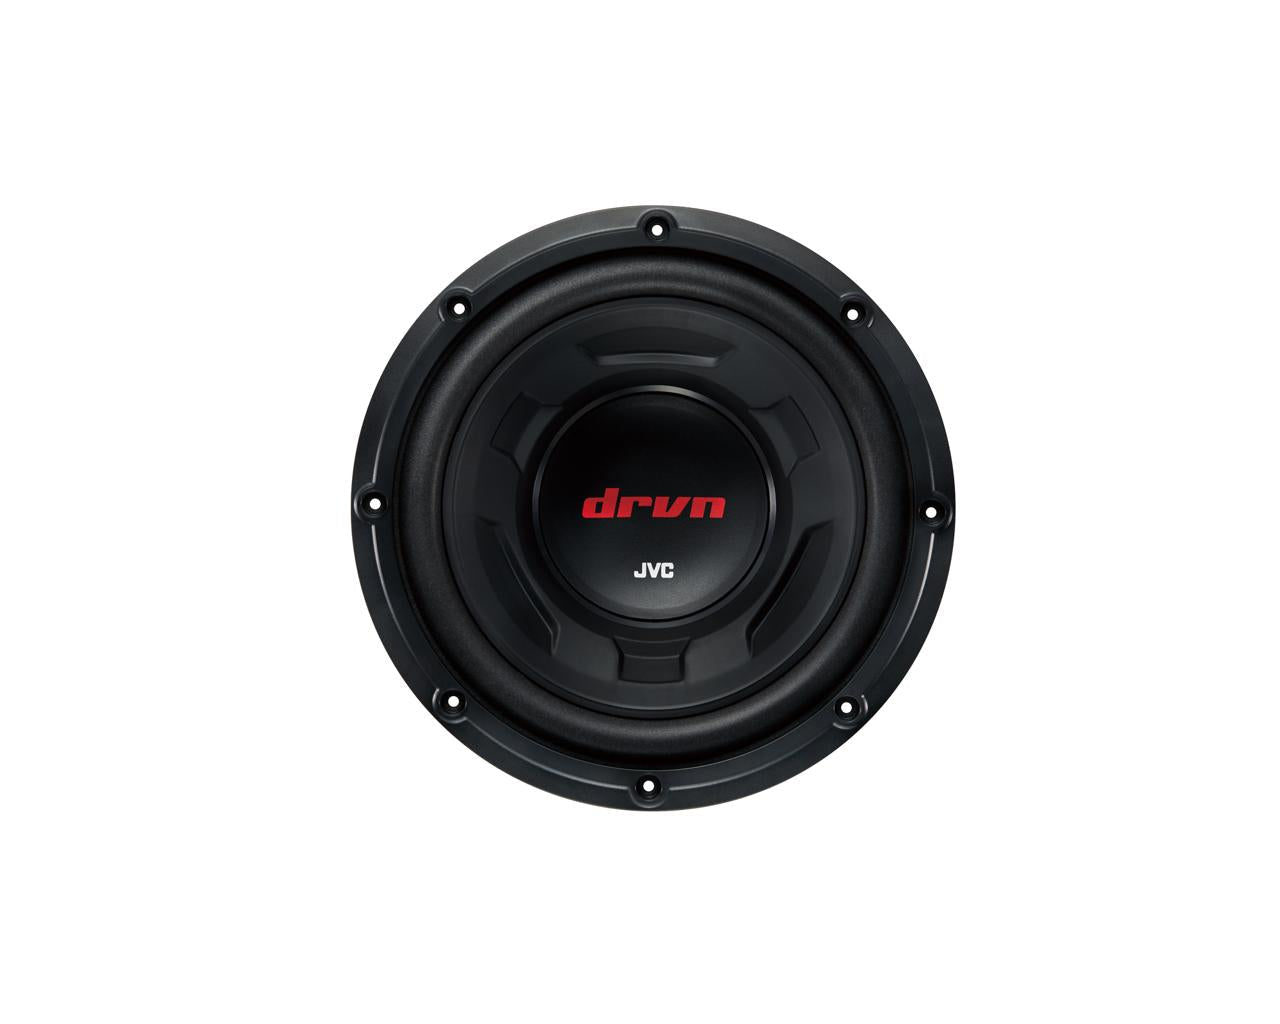 Jvc CW-DR104 10" DRVN series Subwoofers are built tough with a durable 6-layer voice coil and 1300 watts power (300 watts RMS)